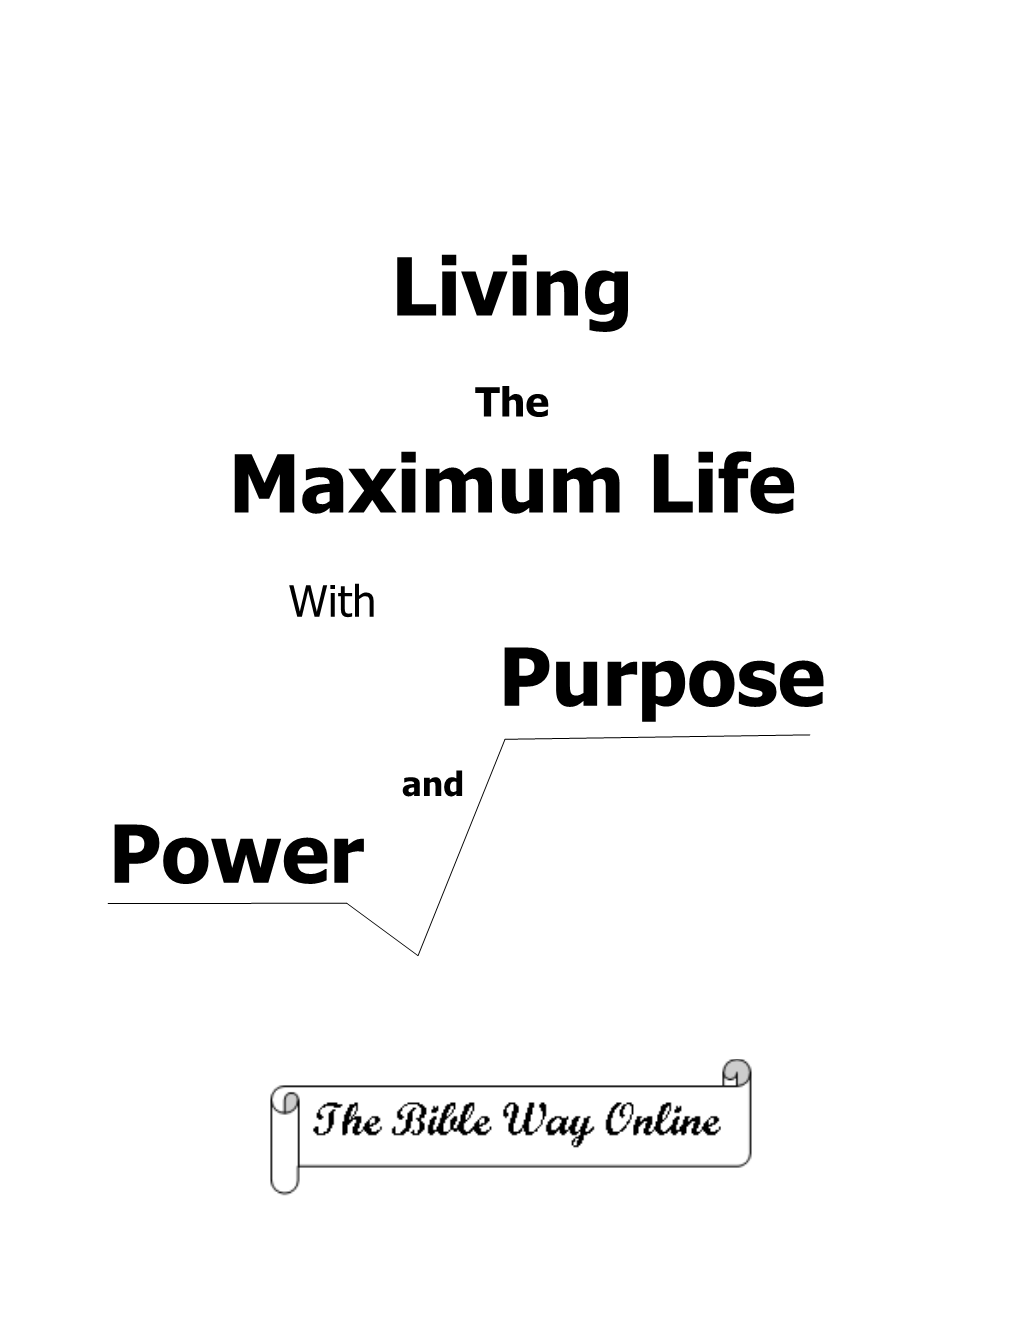 The Maximum Life—Living with Power and Purpose "What Am I